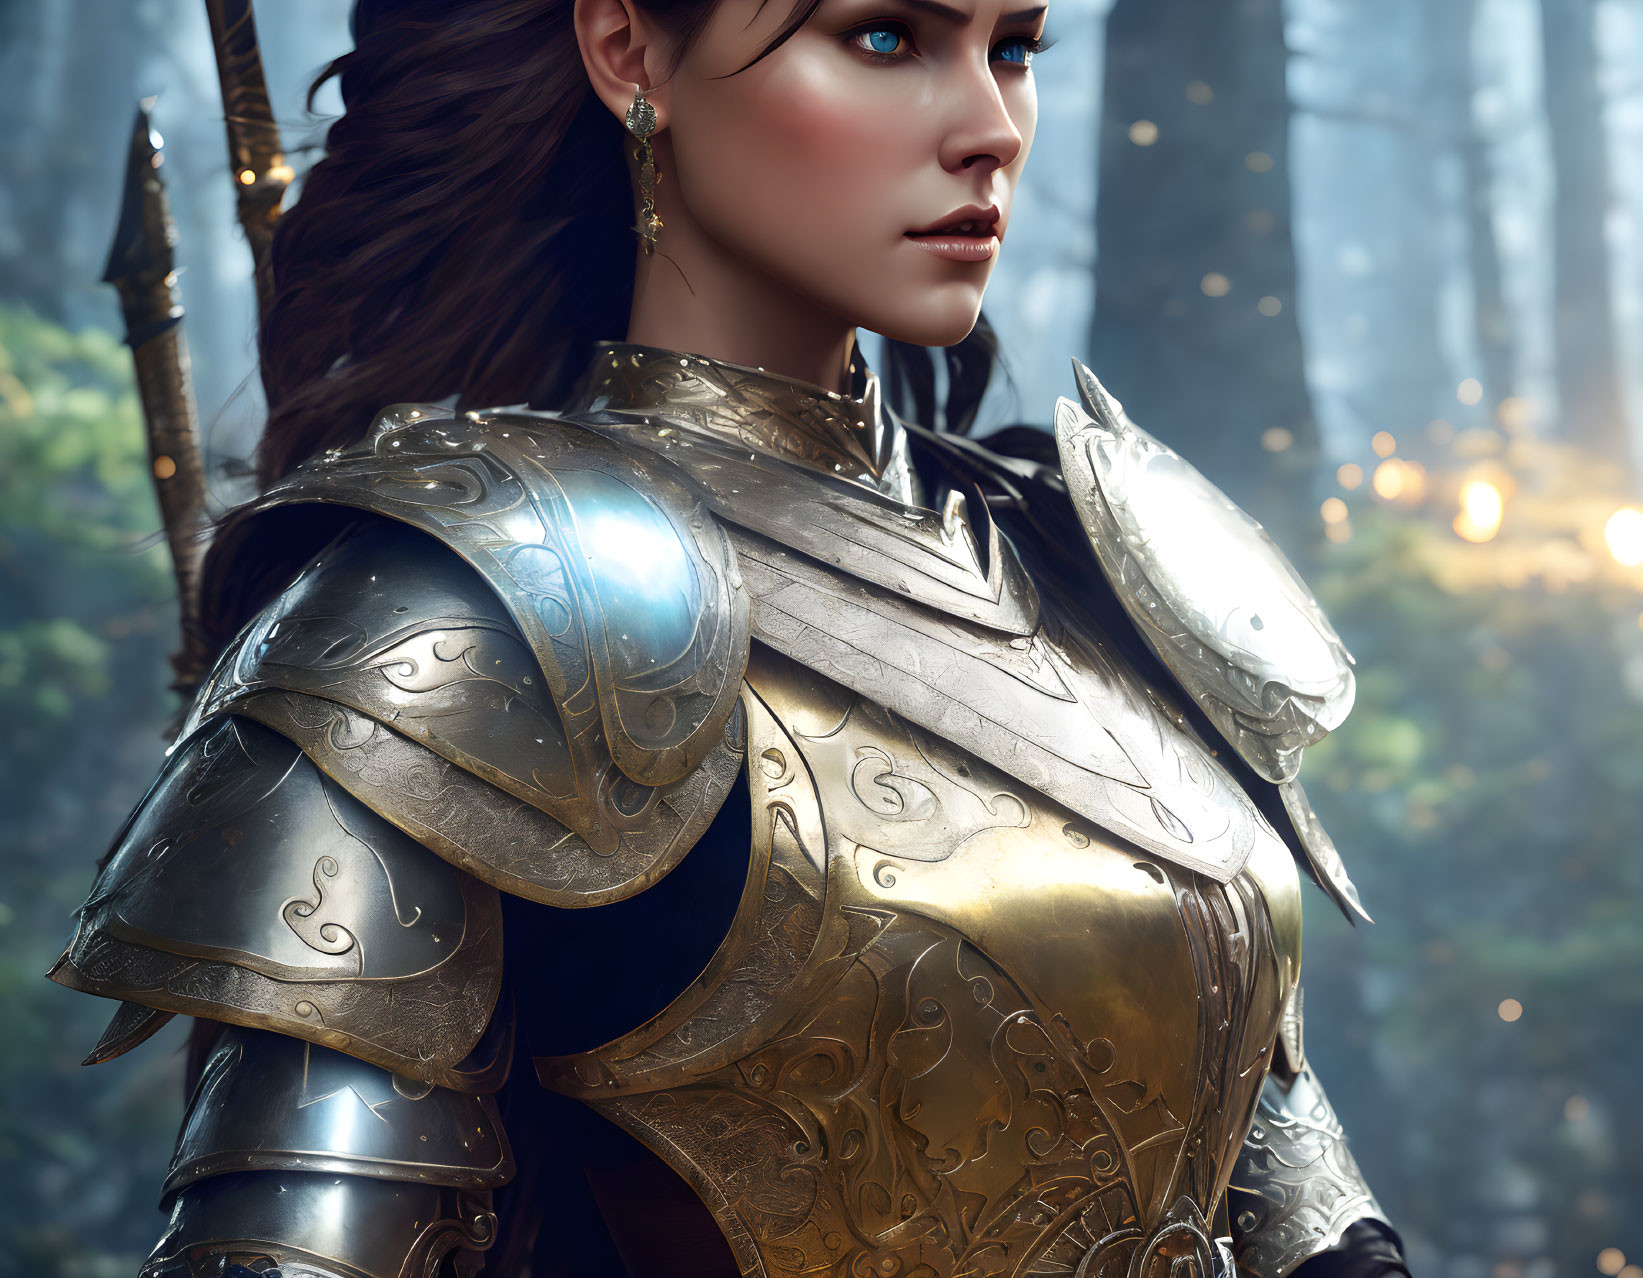 Female warrior in ornate silver and gold armor against forest backdrop